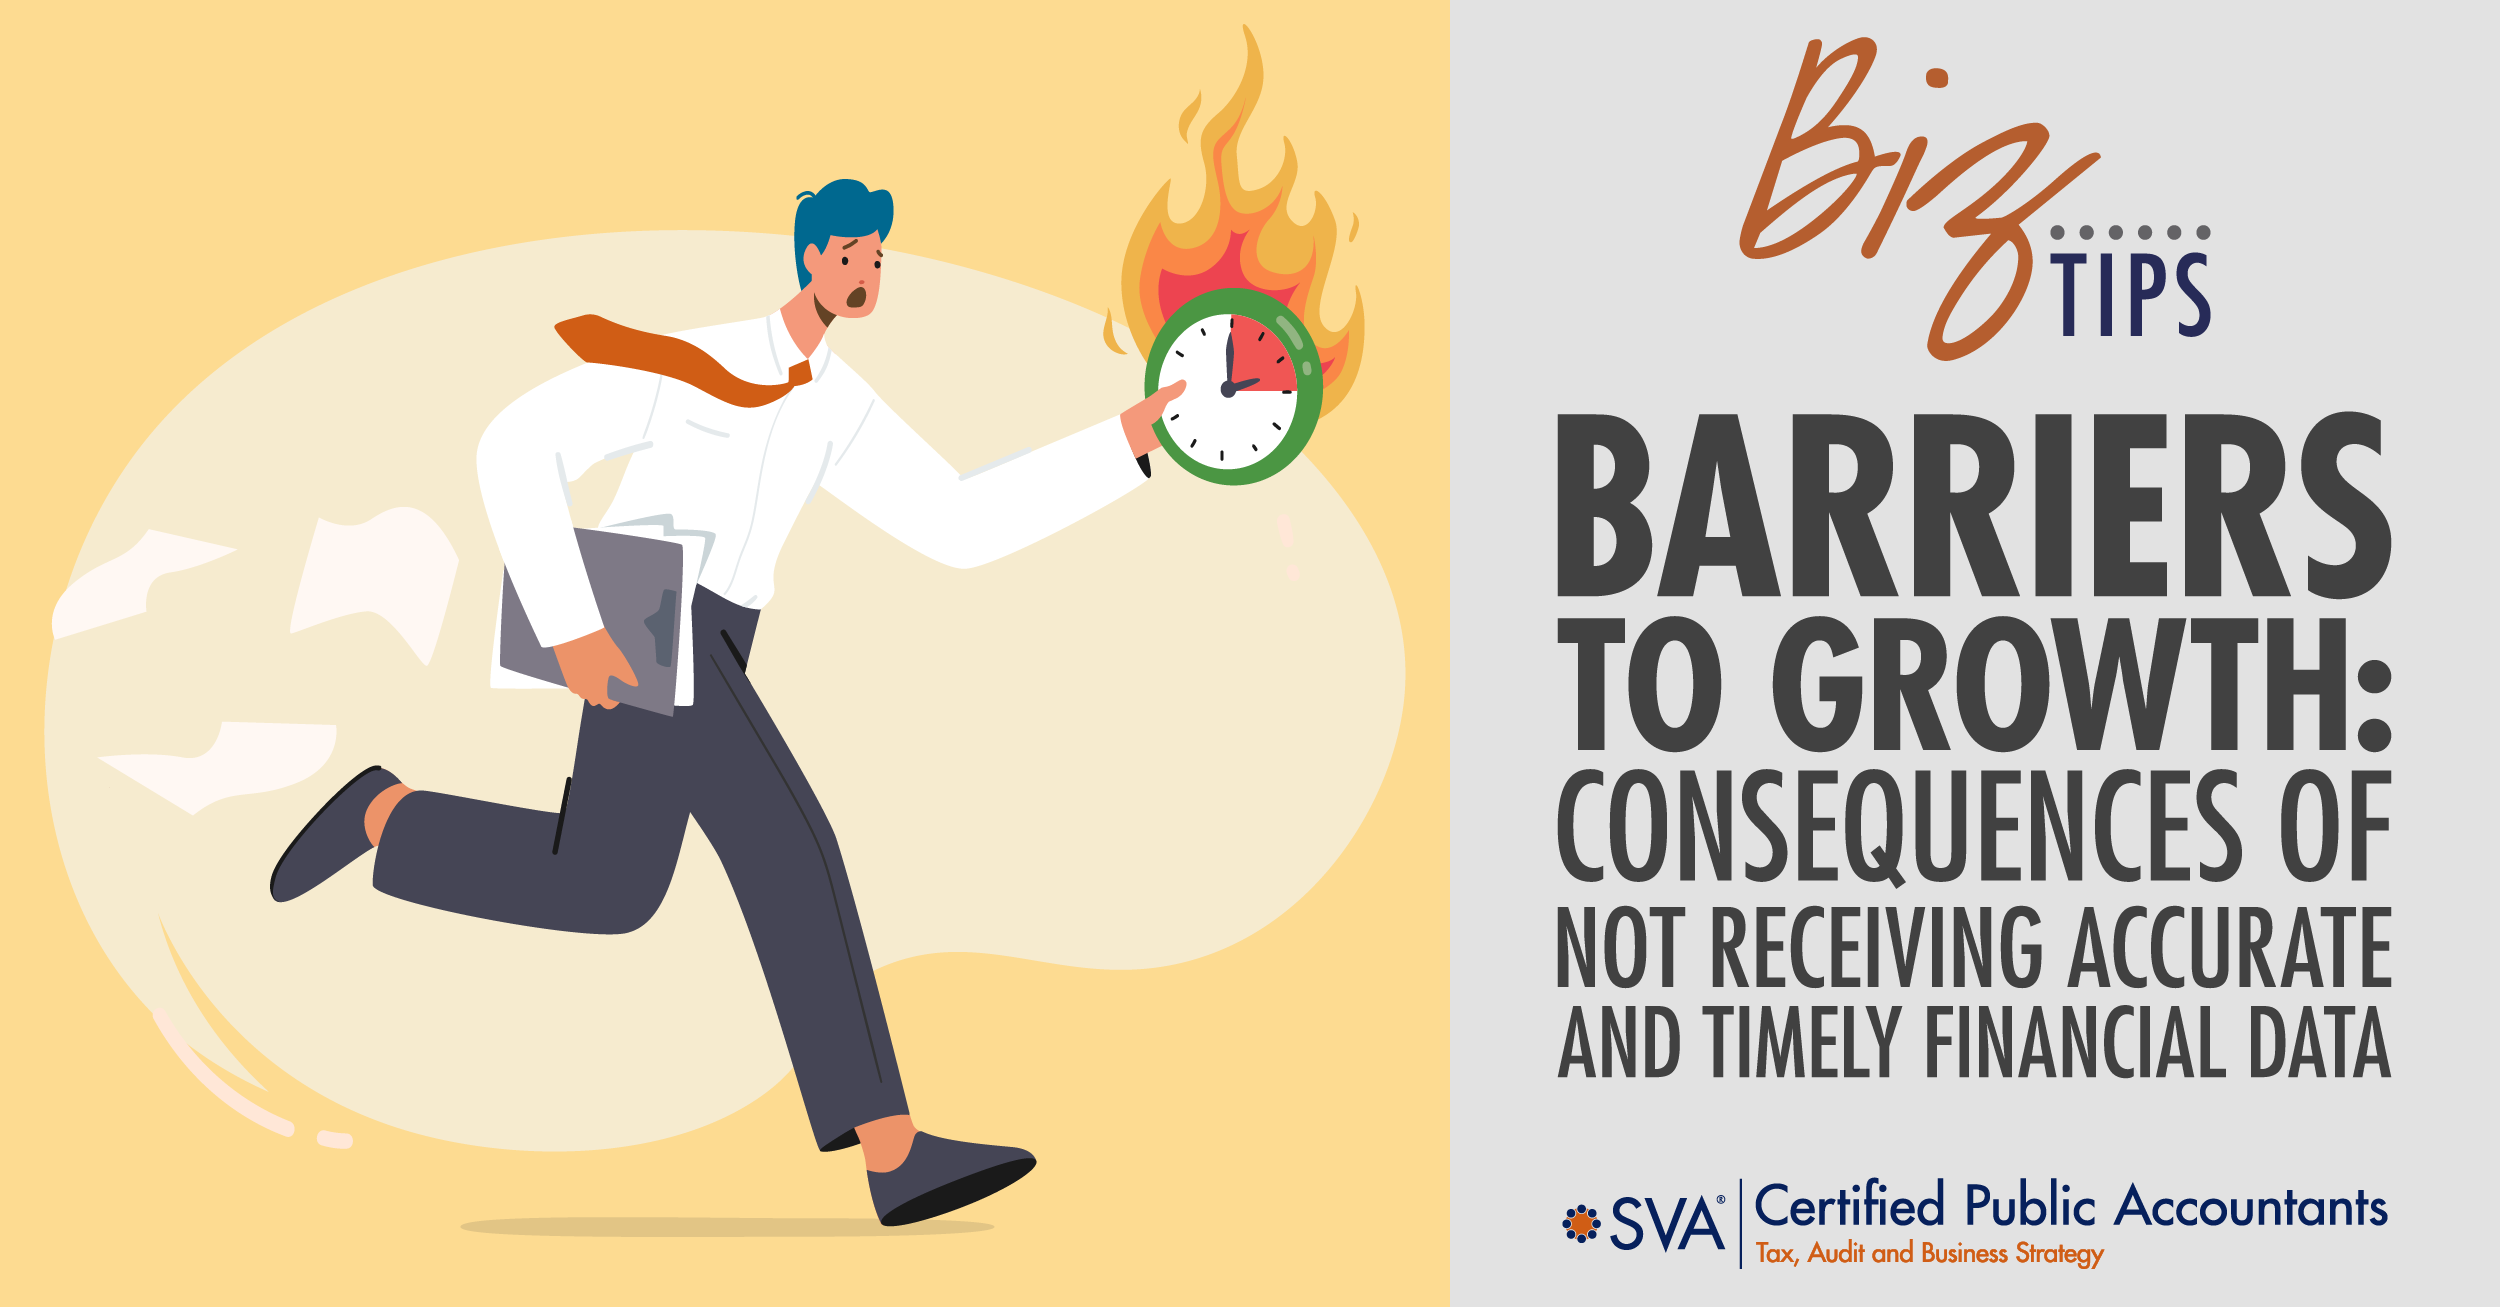 Barriers to Business Growth: Consequences of Not Receiving Accurate and Timely Financial Data